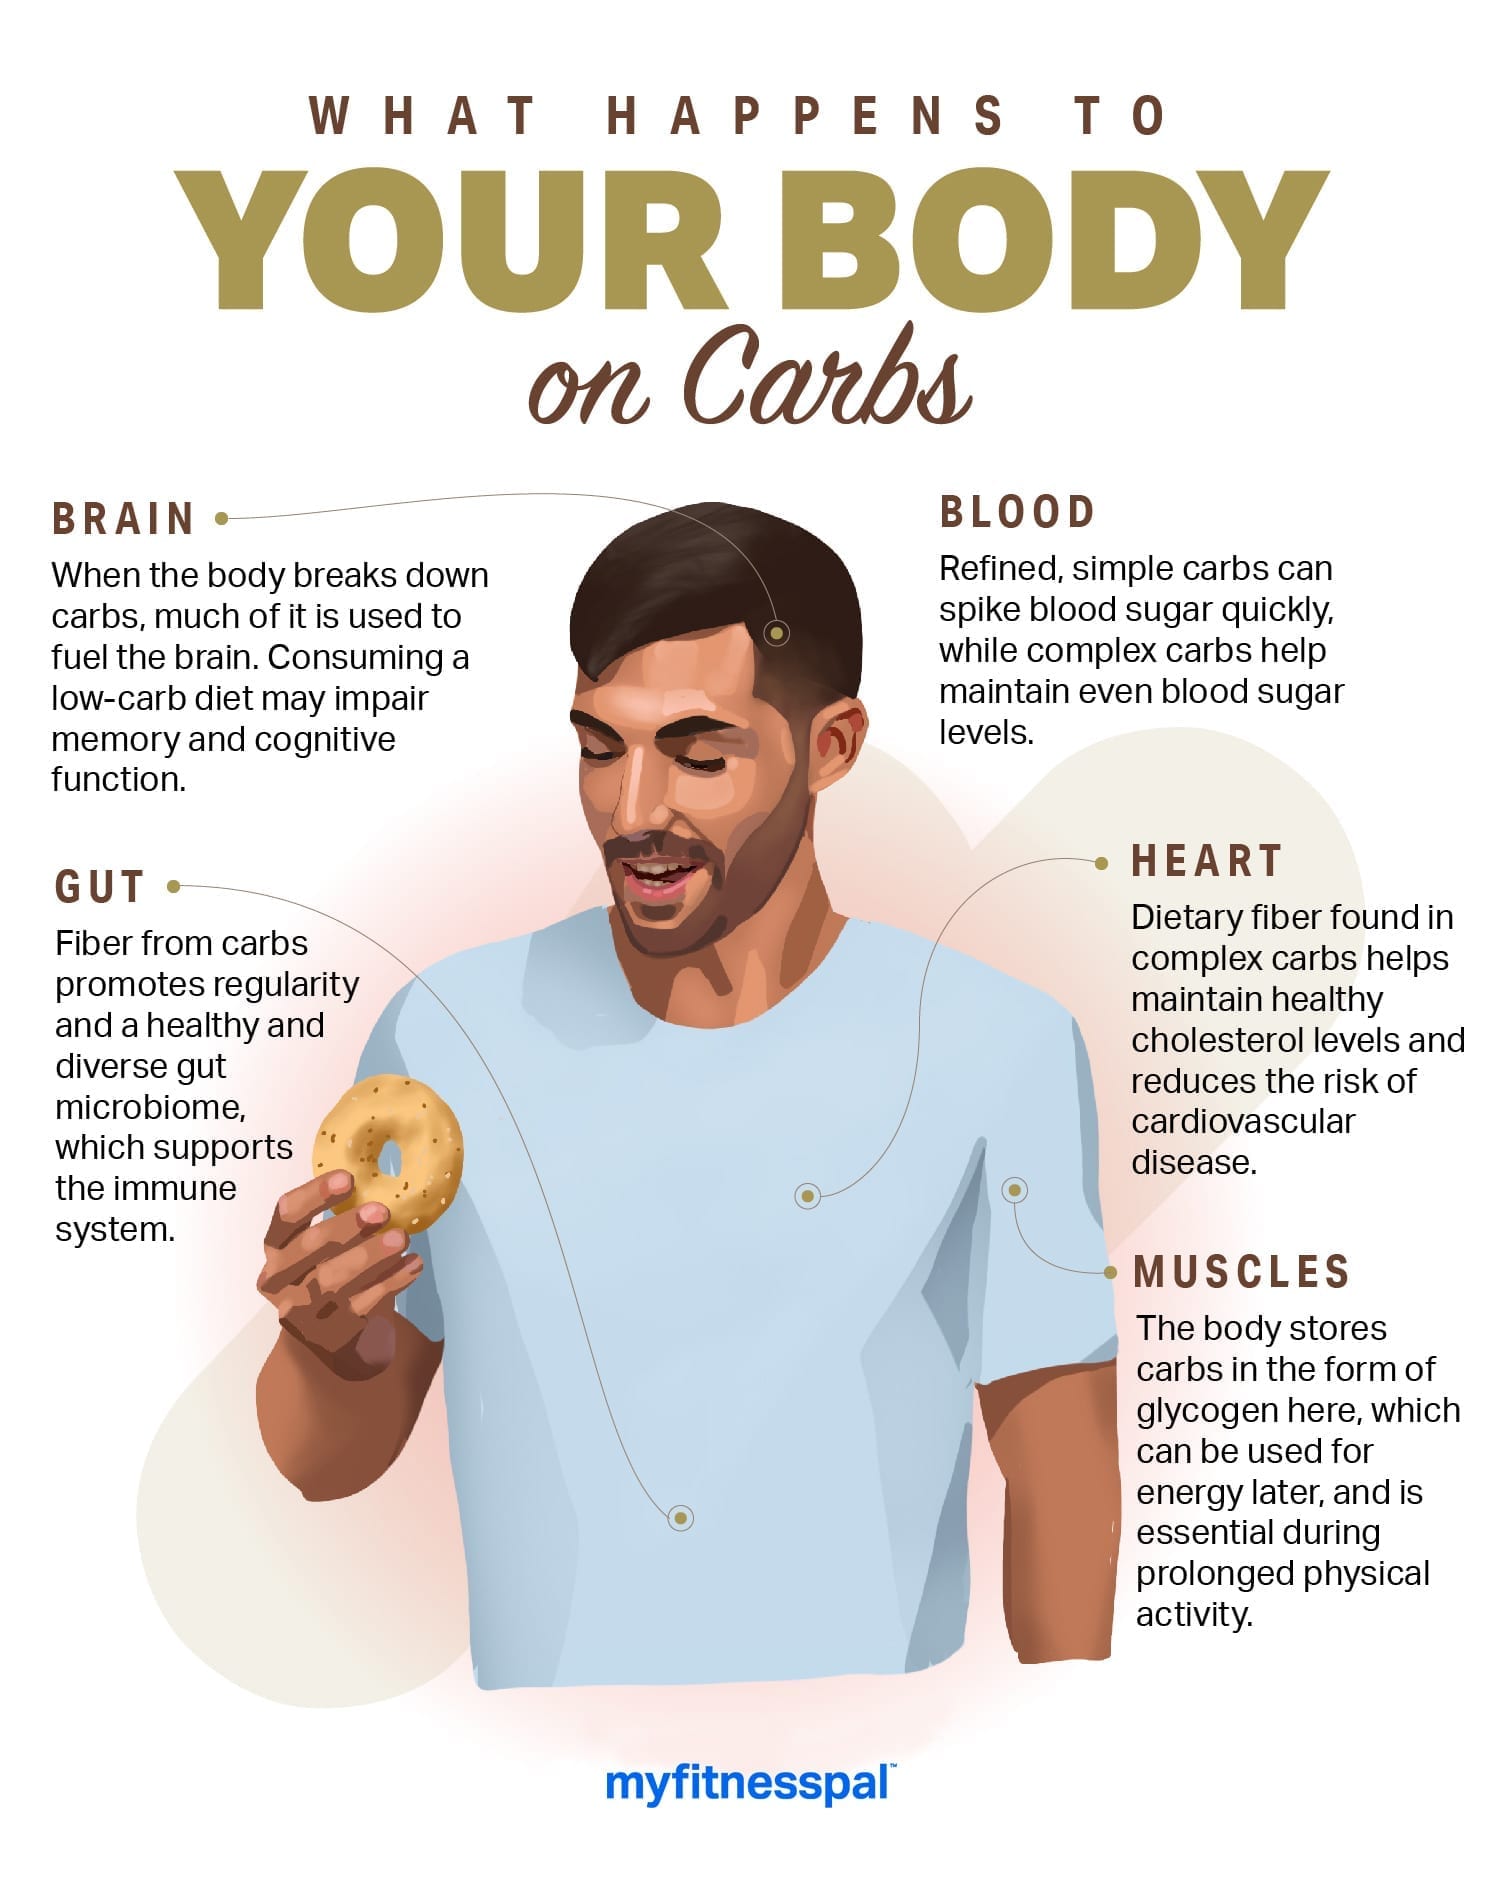 What Happens to Your Body on Carbs